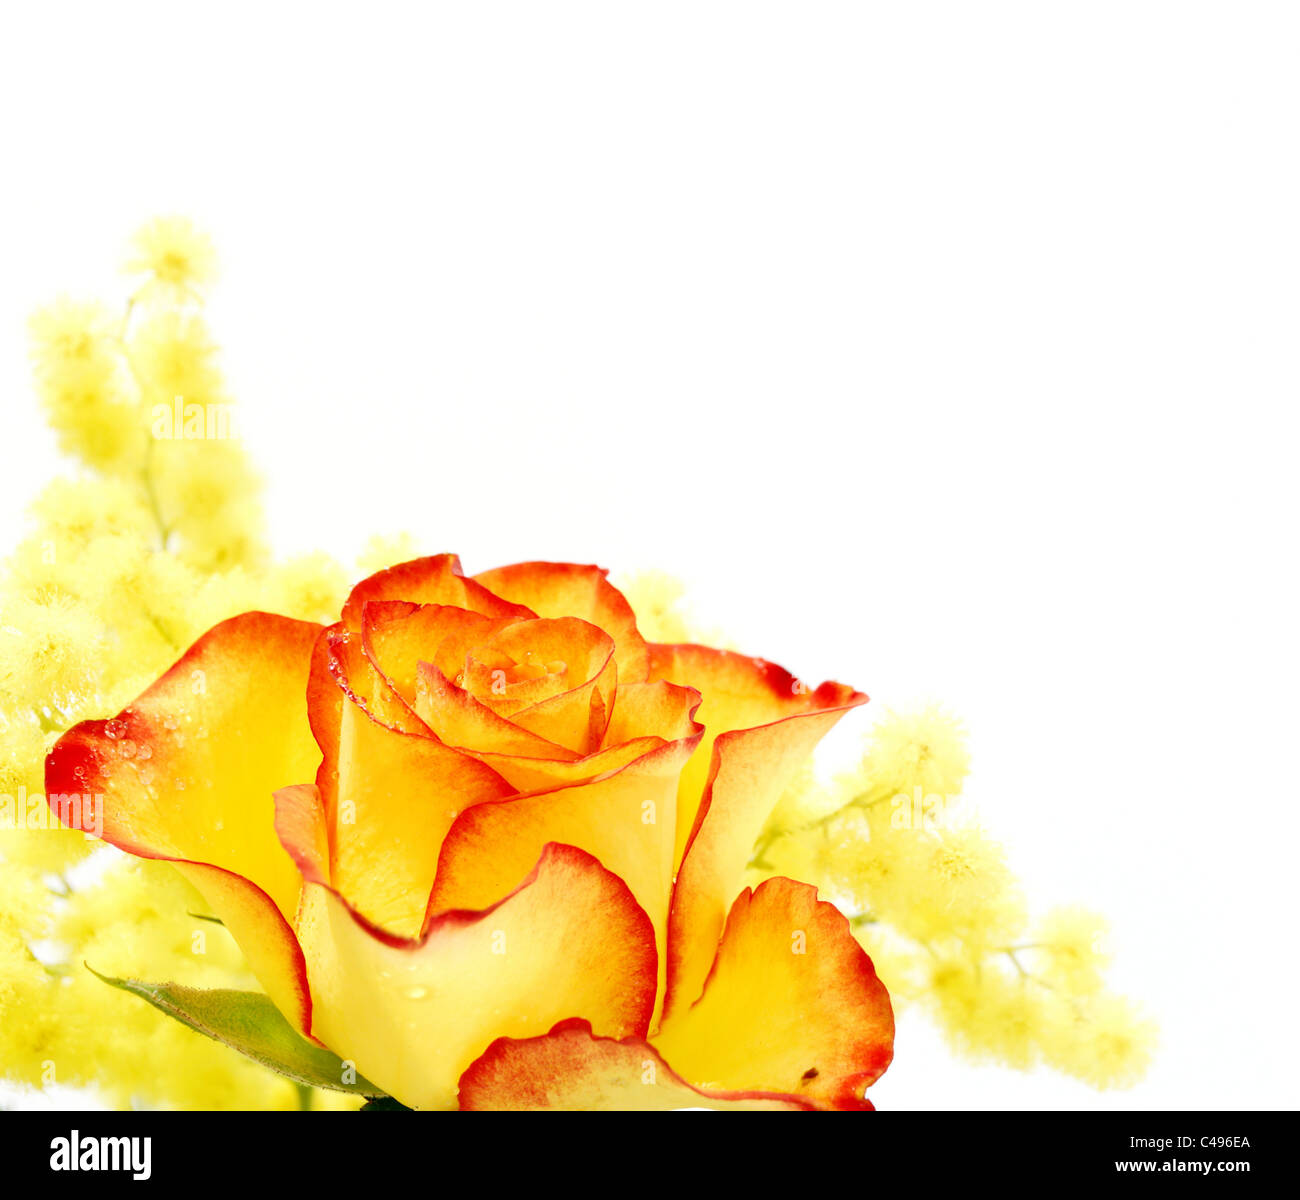 Yellow and red rose photographed on white background Stock Photo